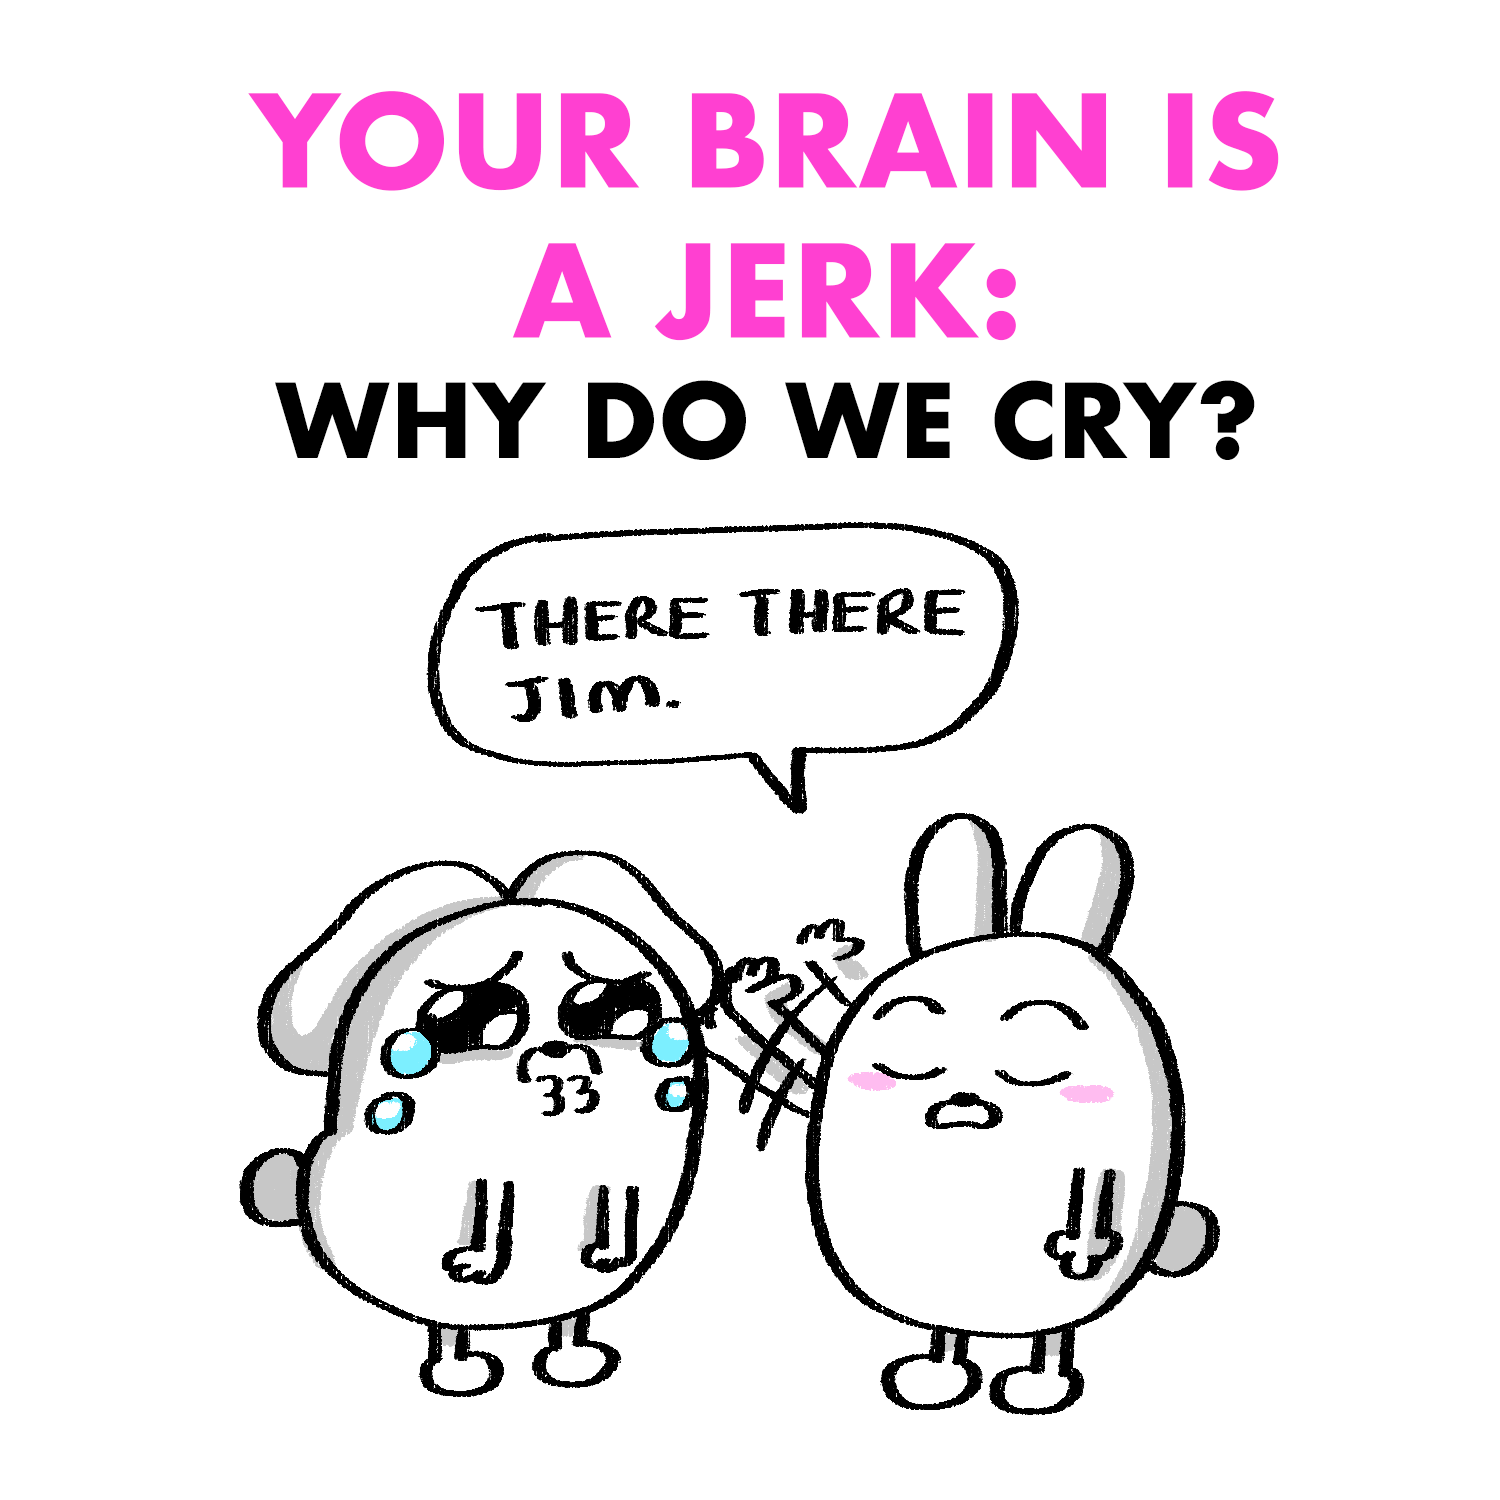 Your Brain is a Jerk: Why Do We Cry?